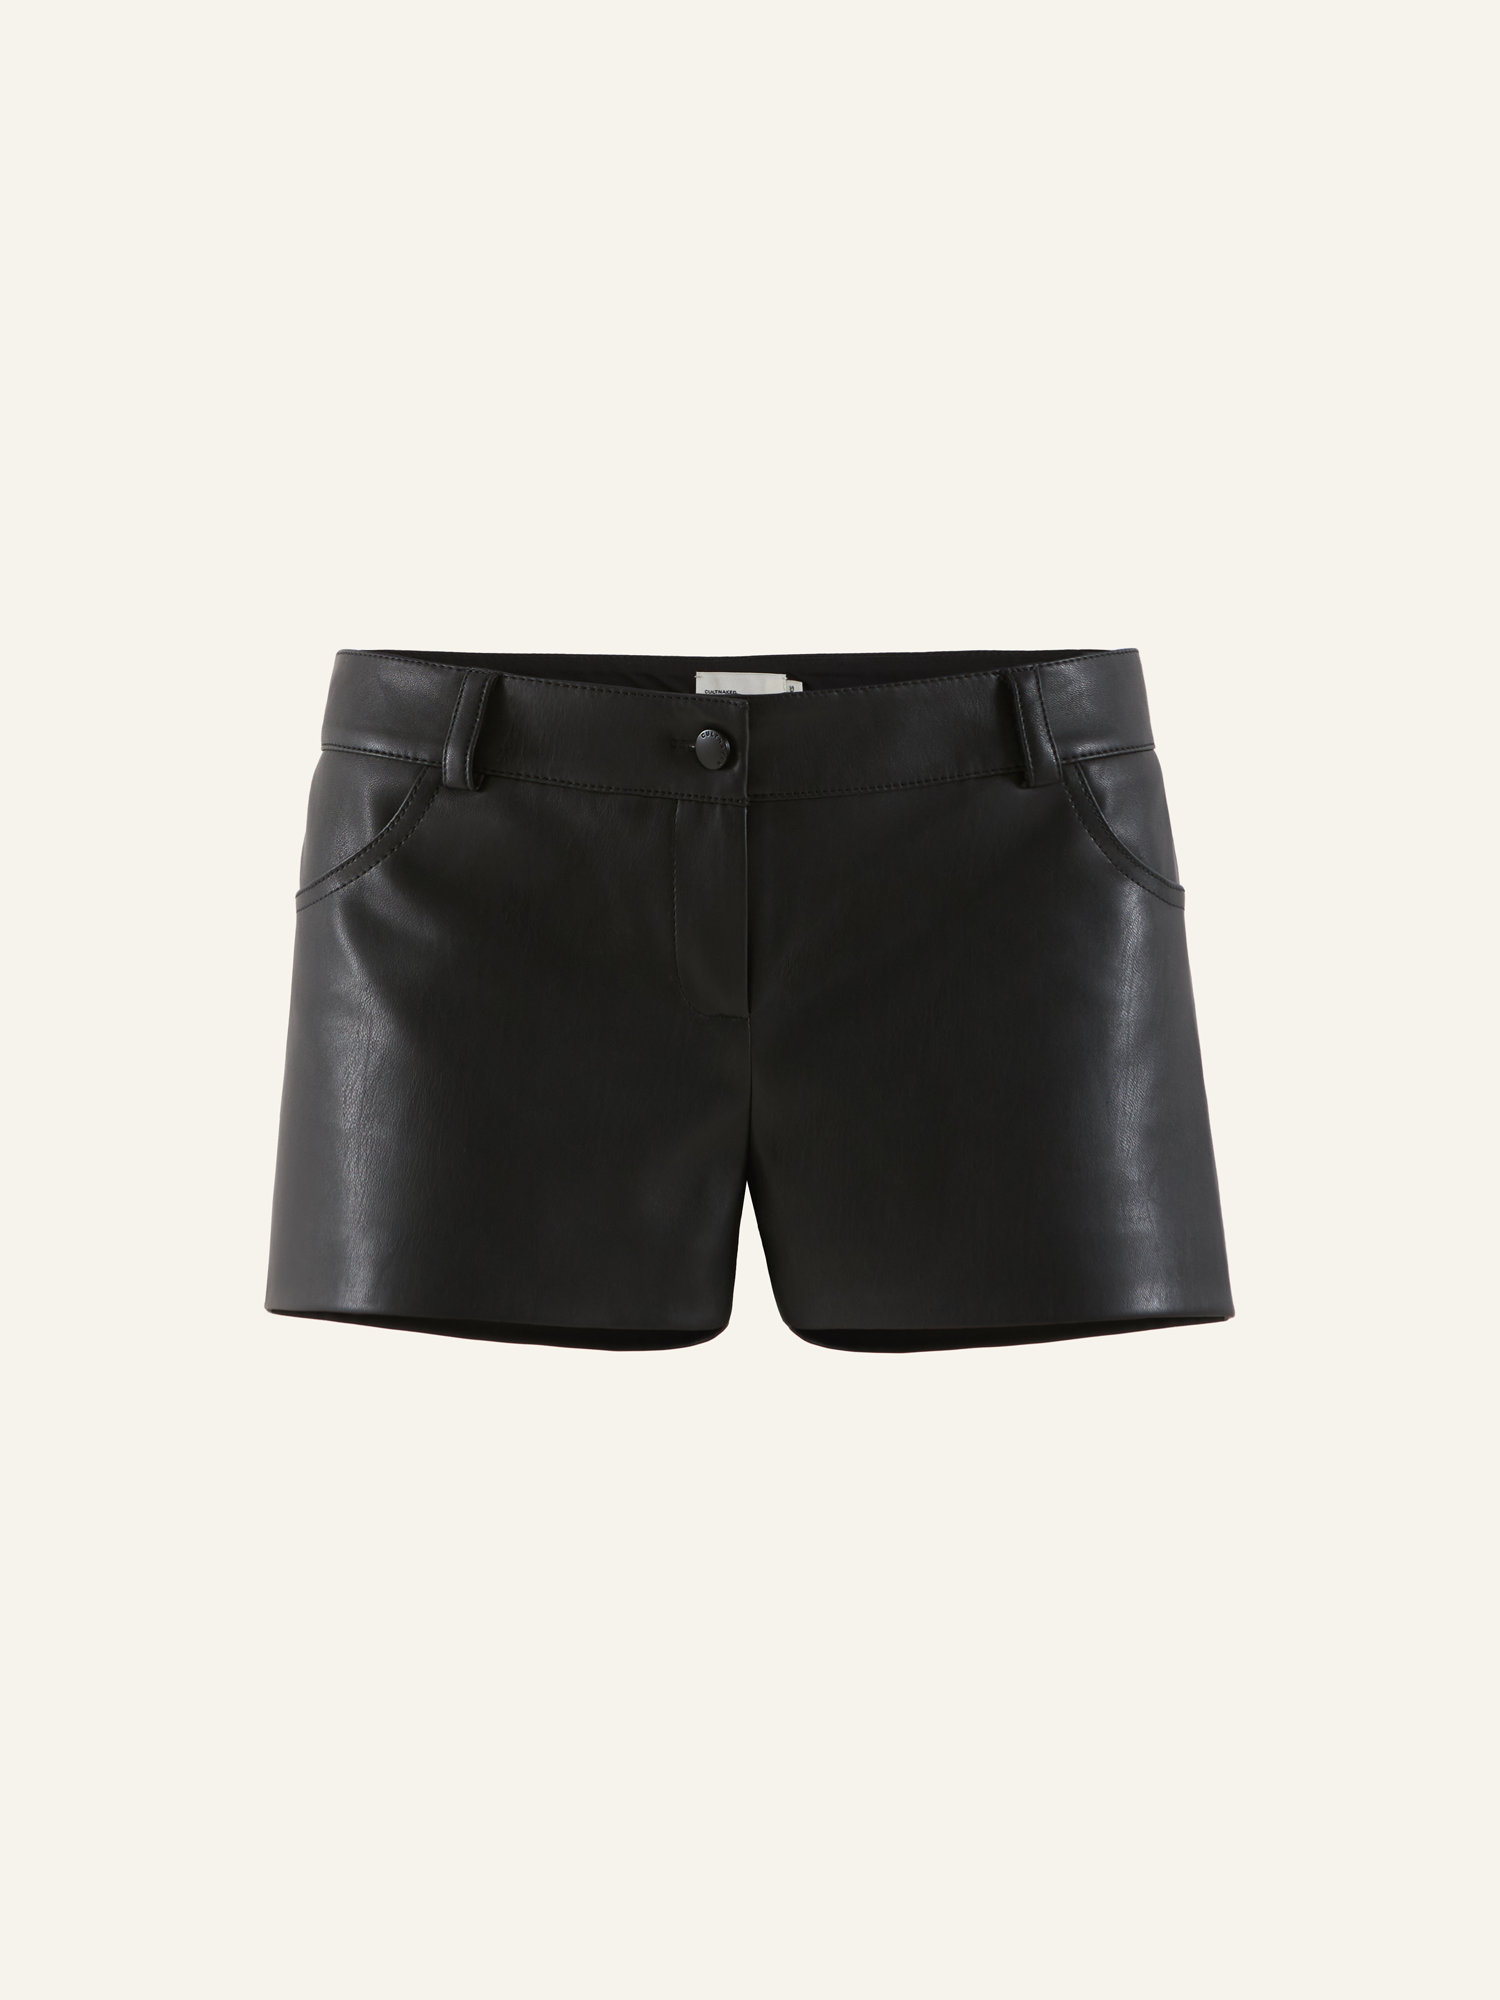 Product photo of a black vegan leather mini shorts with mid rise